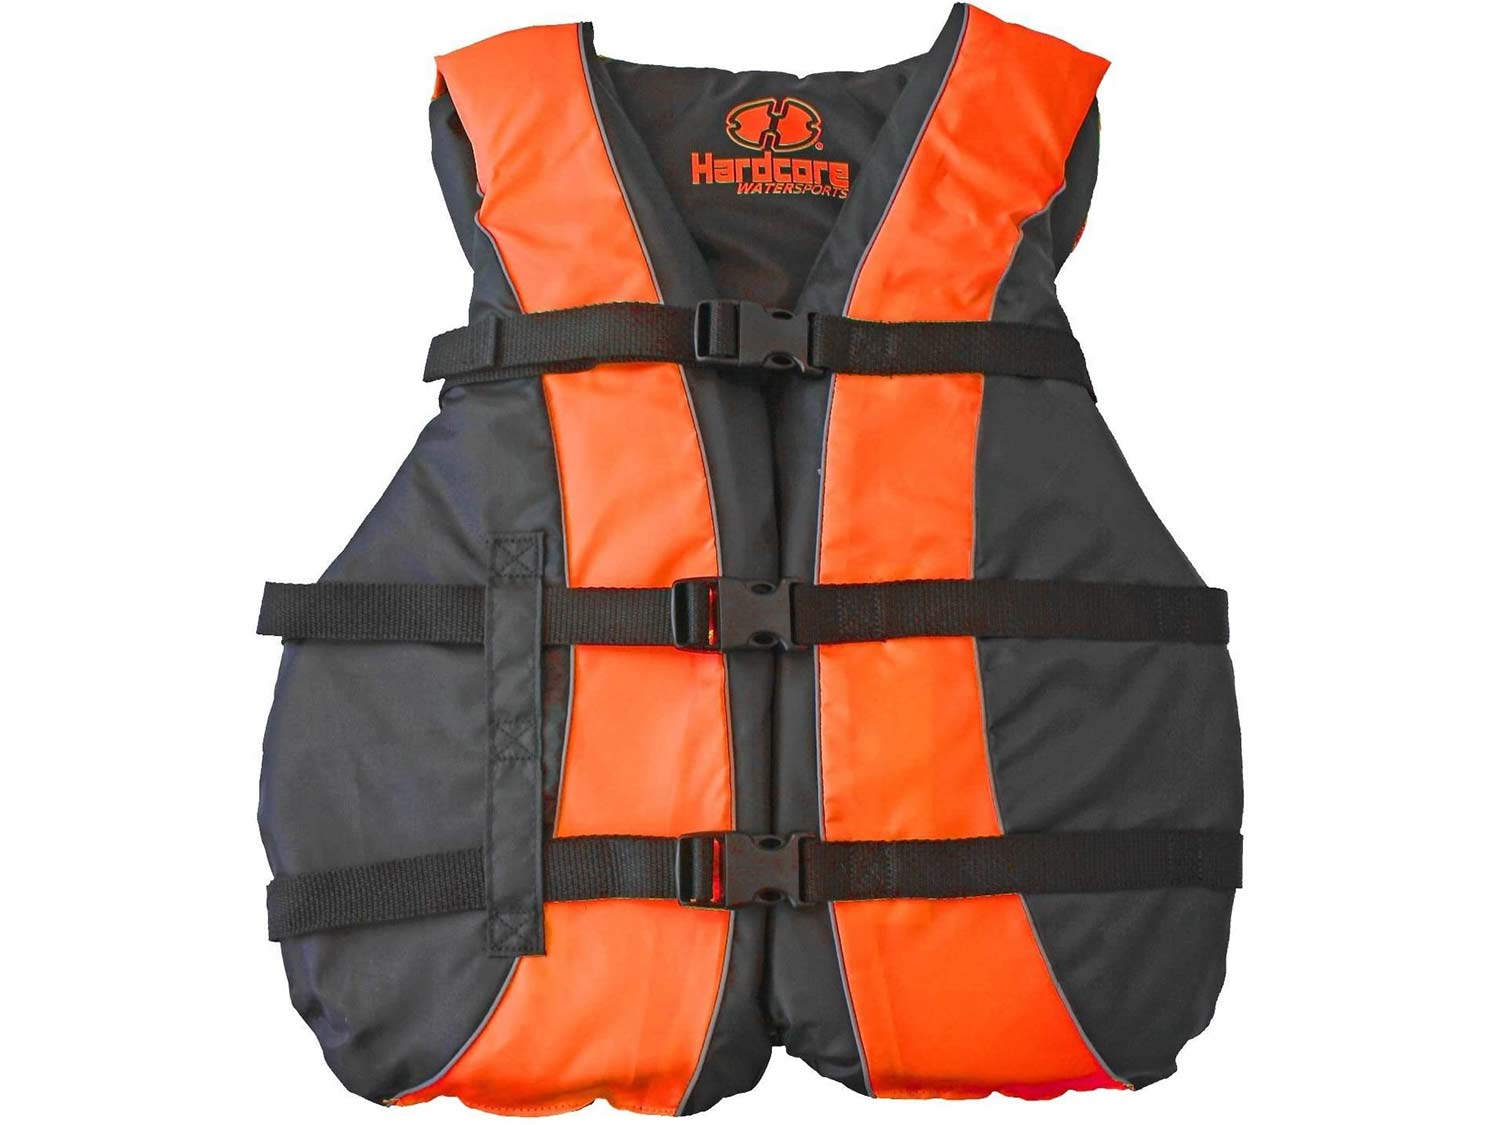 Details about   Fishing Life Jacket Water Sports Floatation Vest Adults Children Buoyancy T0I0 